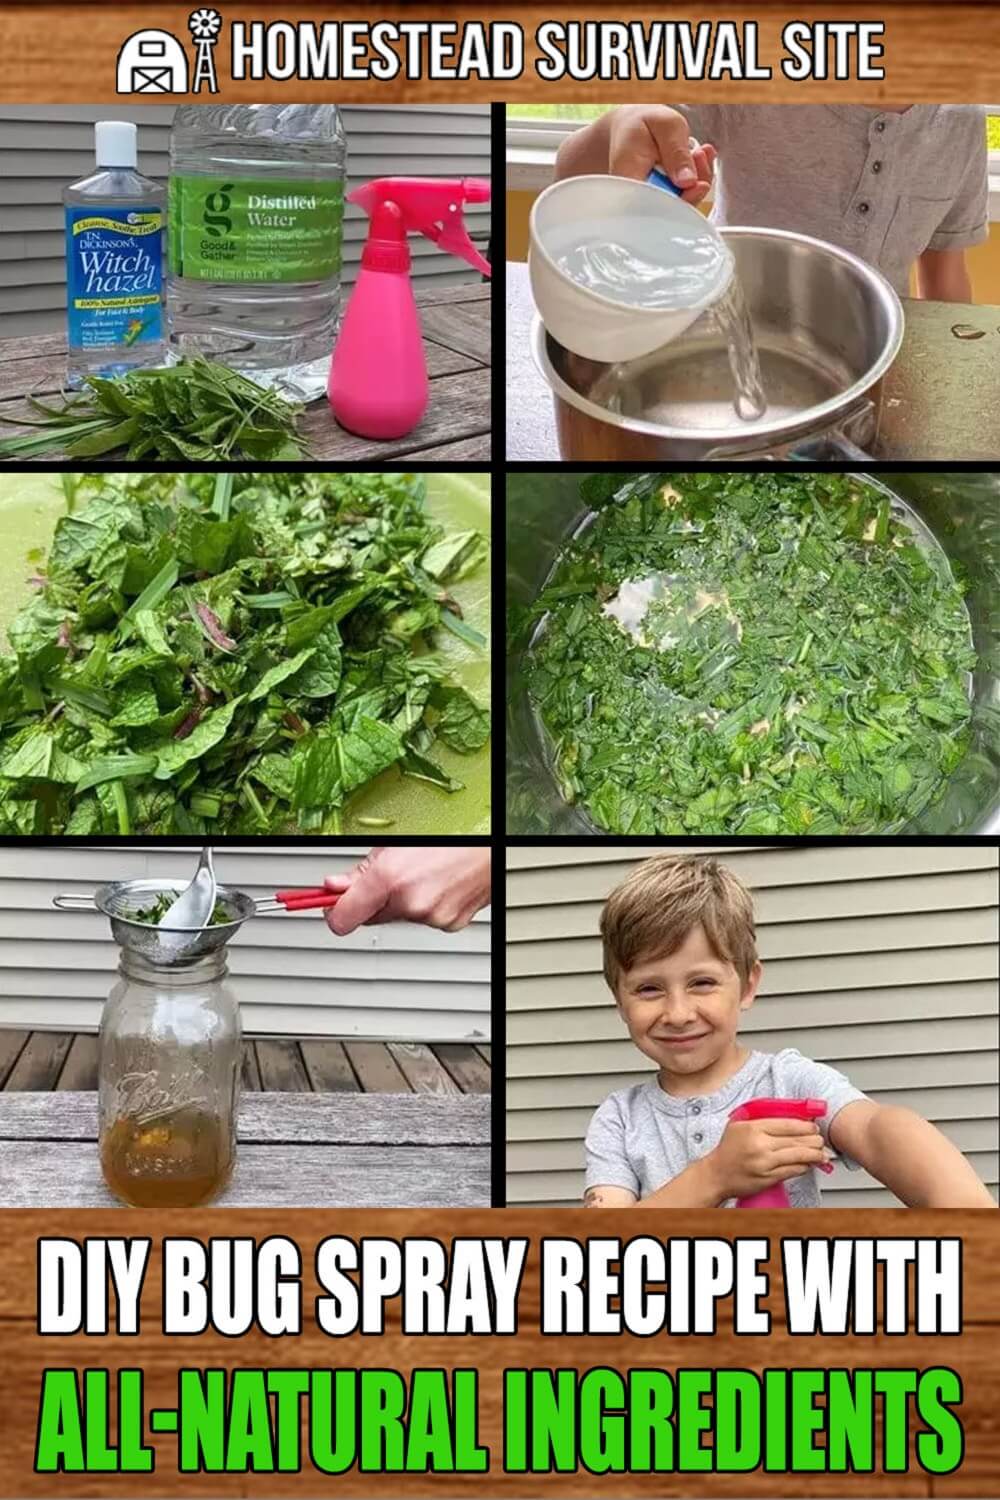 DIY Bug Spray Recipe With All-Natural Ingredients